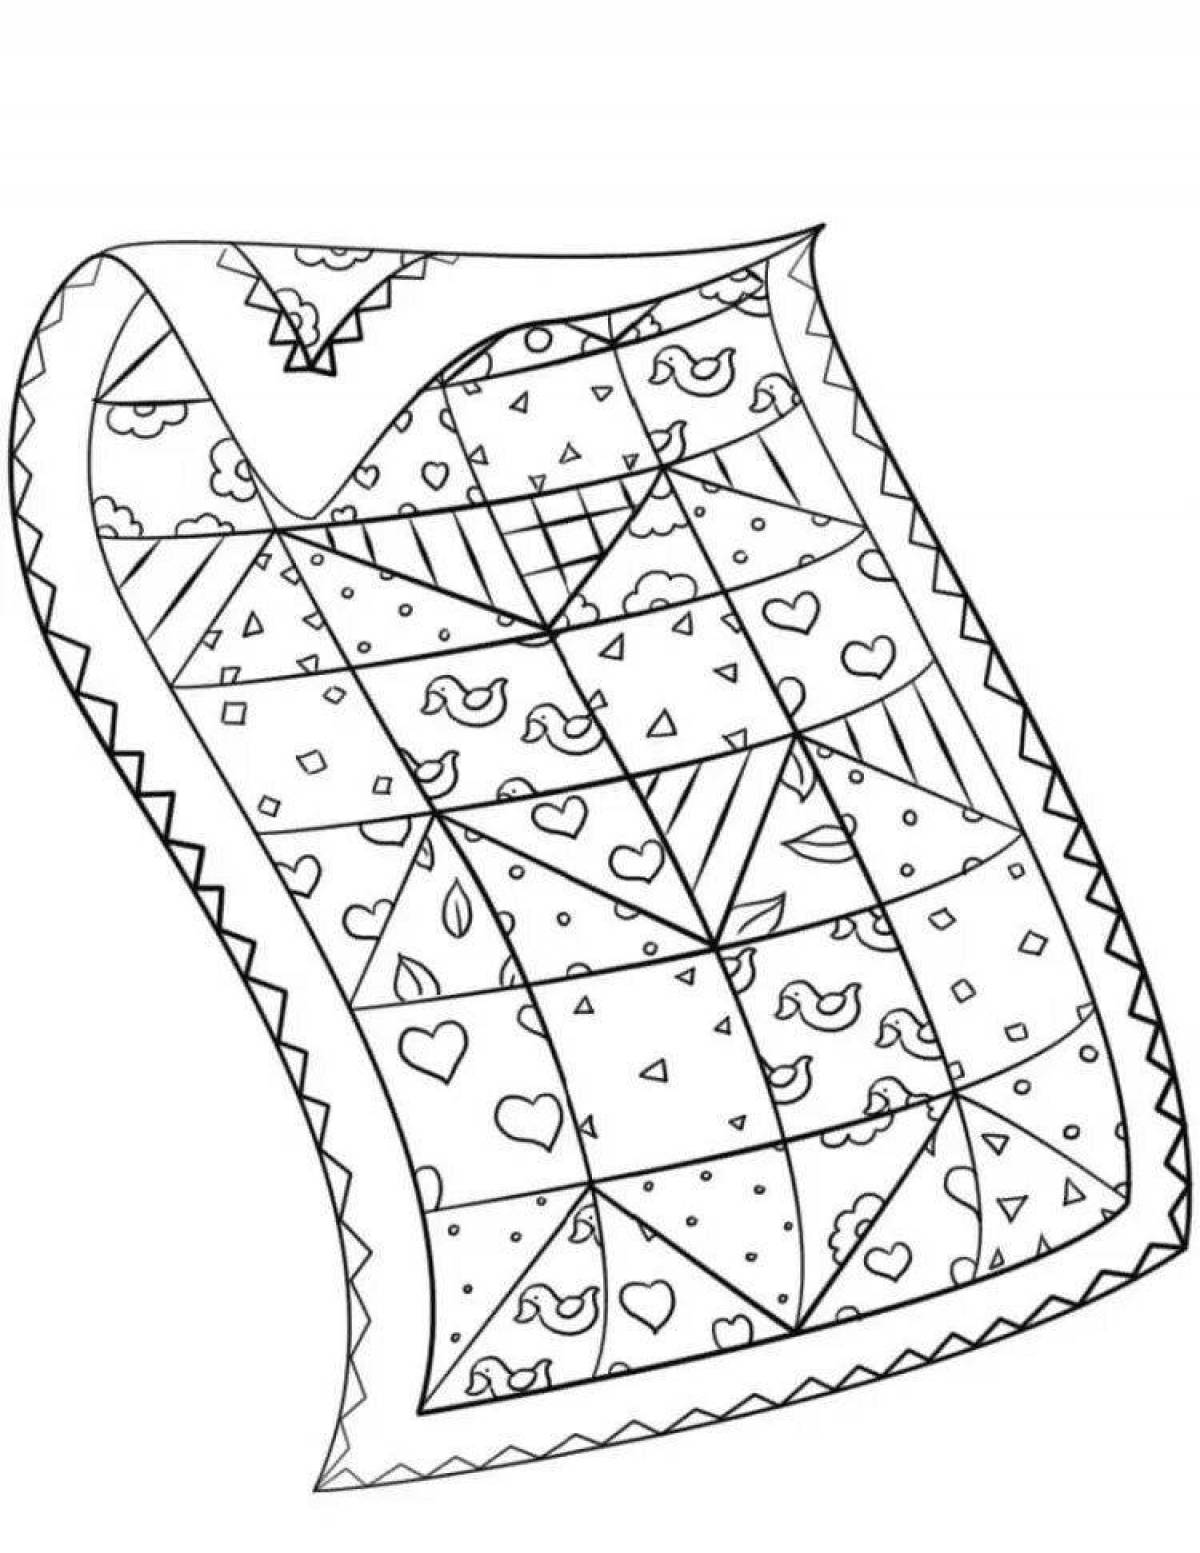 Glitter blanket coloring page